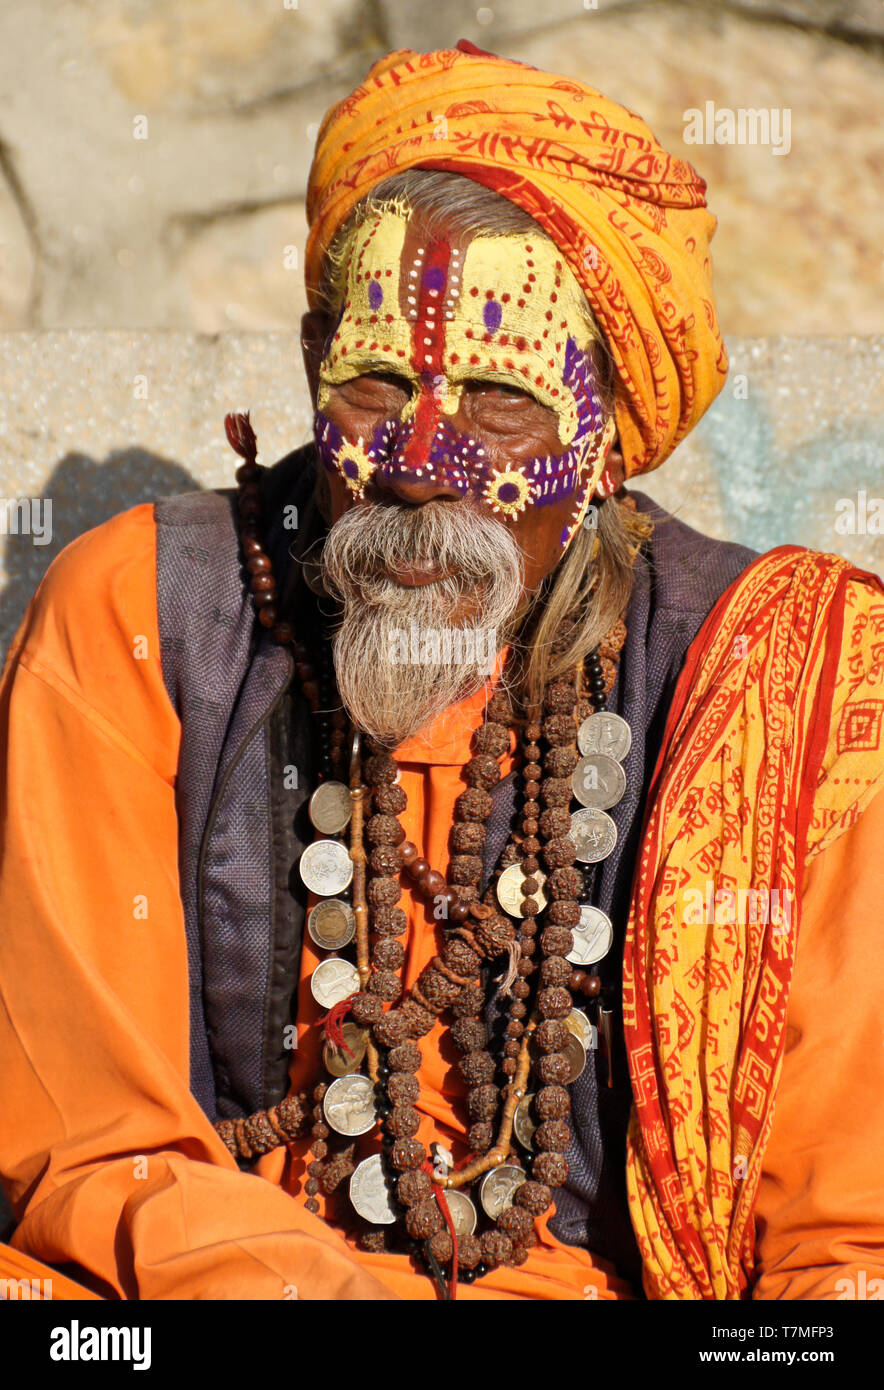 Portrait of a sadhu (holy man) with painted face, clad in orange robes, Pashupatinath Hindu temple, Kathmandu Valley, Nepal Stock Photo